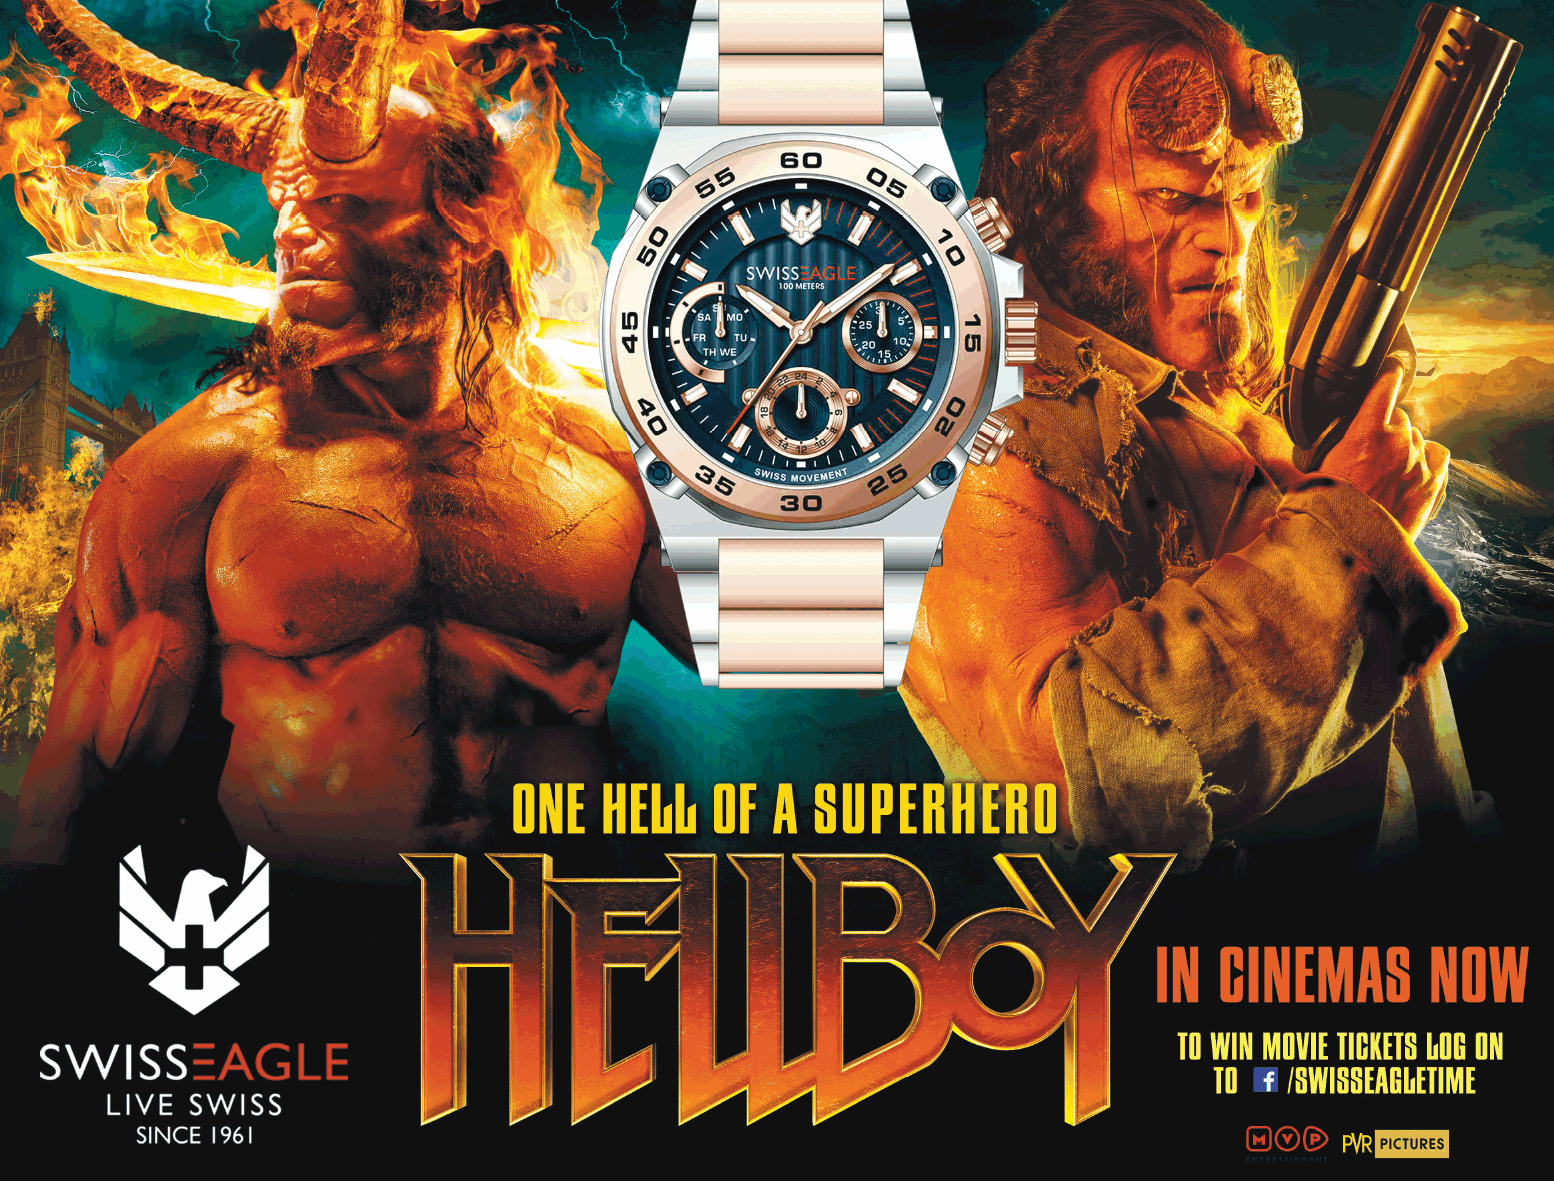 swiss-eagle-watches-one-hell-of-a-superhero-hellboy-ad-bombay-times-13-04-2019.png